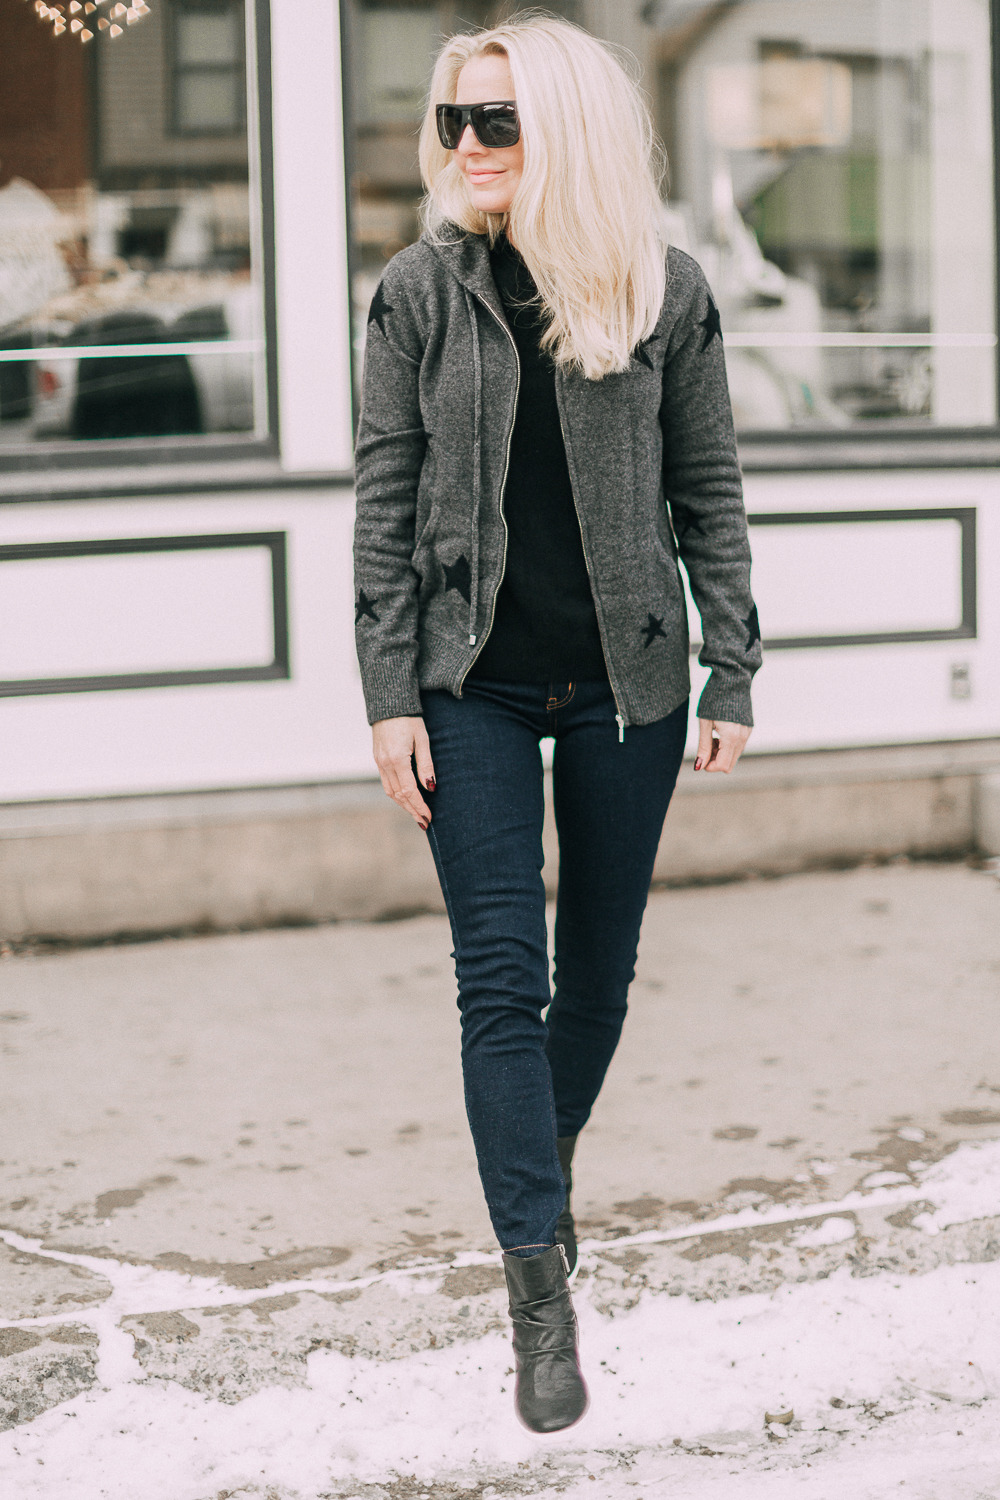 wardrobe staples your closet needs including a black cashmere crewneck sweater and high rise dark wash skinny jeans both from Walmart paired with a cashmere star hoodie and scrunch sneaker boots